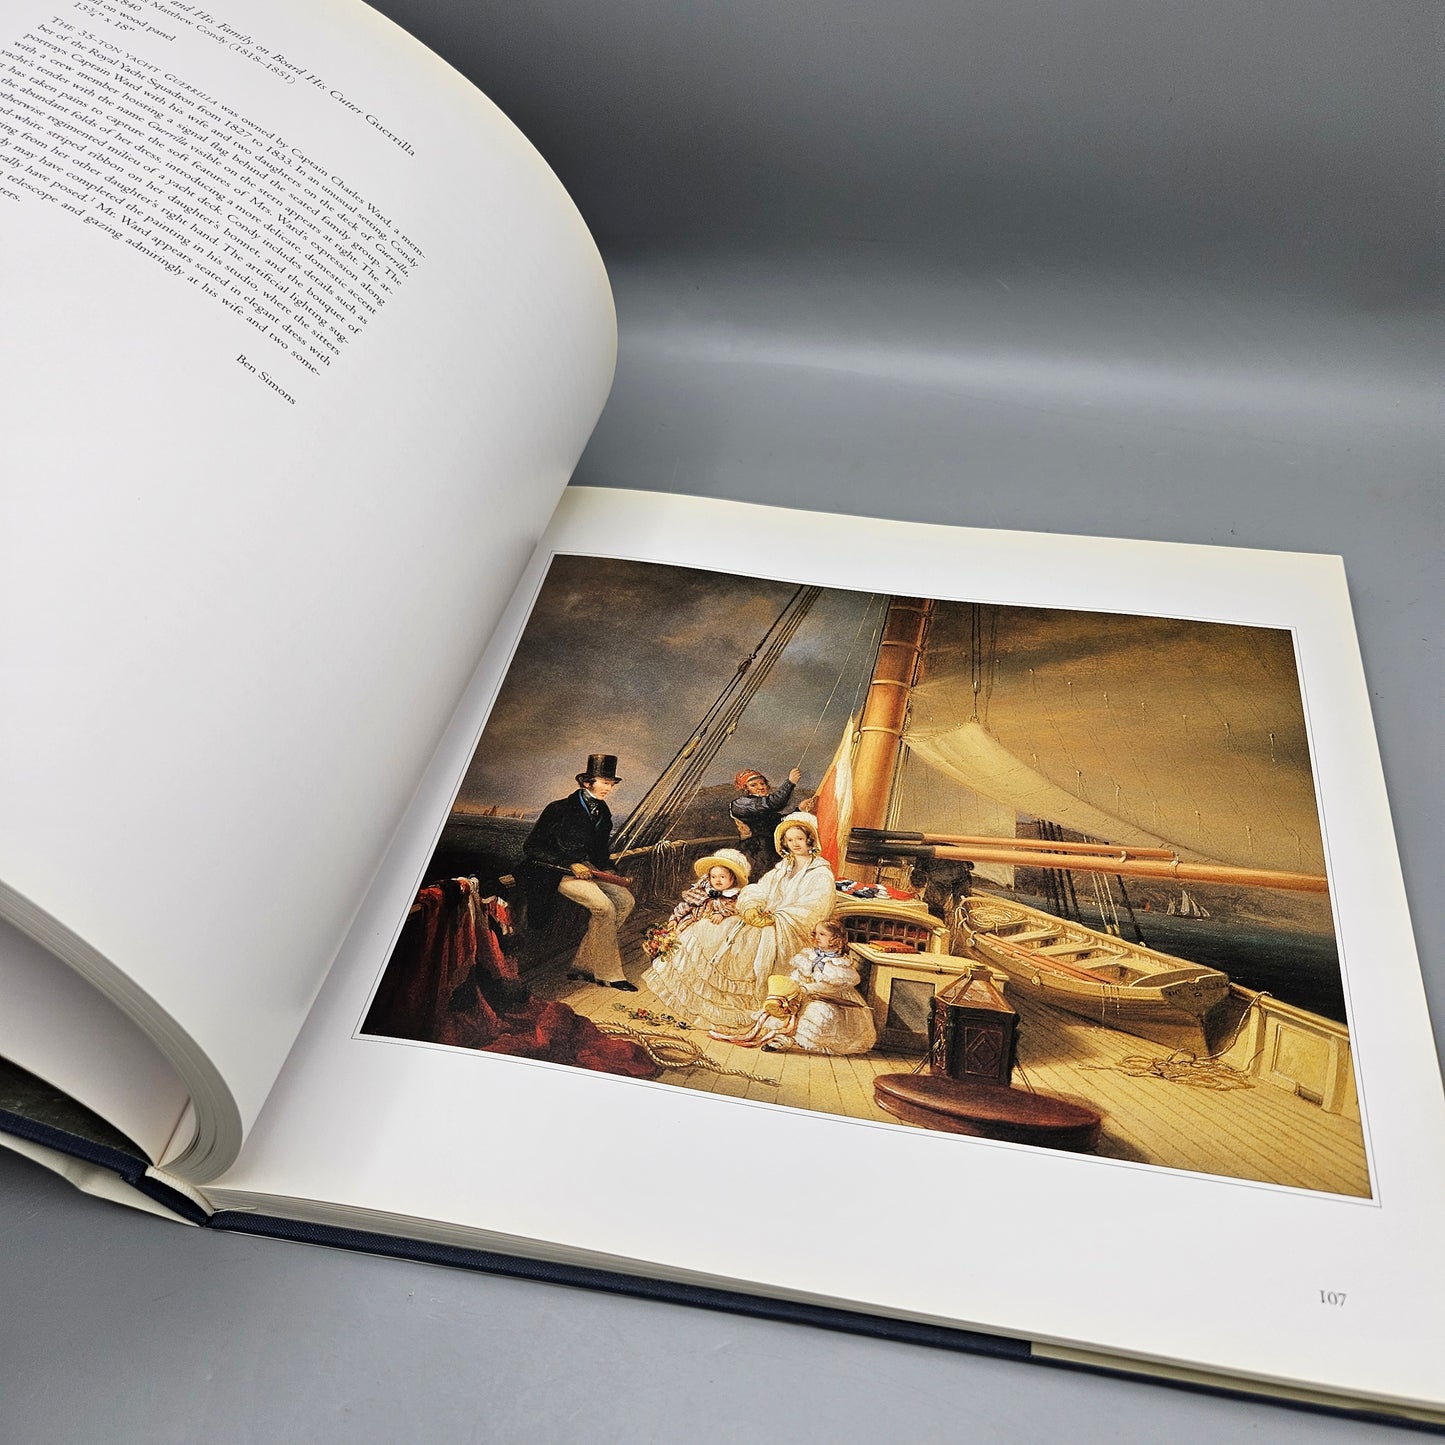 Book: A Yachtsman's Eye: The Glen S. Foster Collection of Marine Paintings